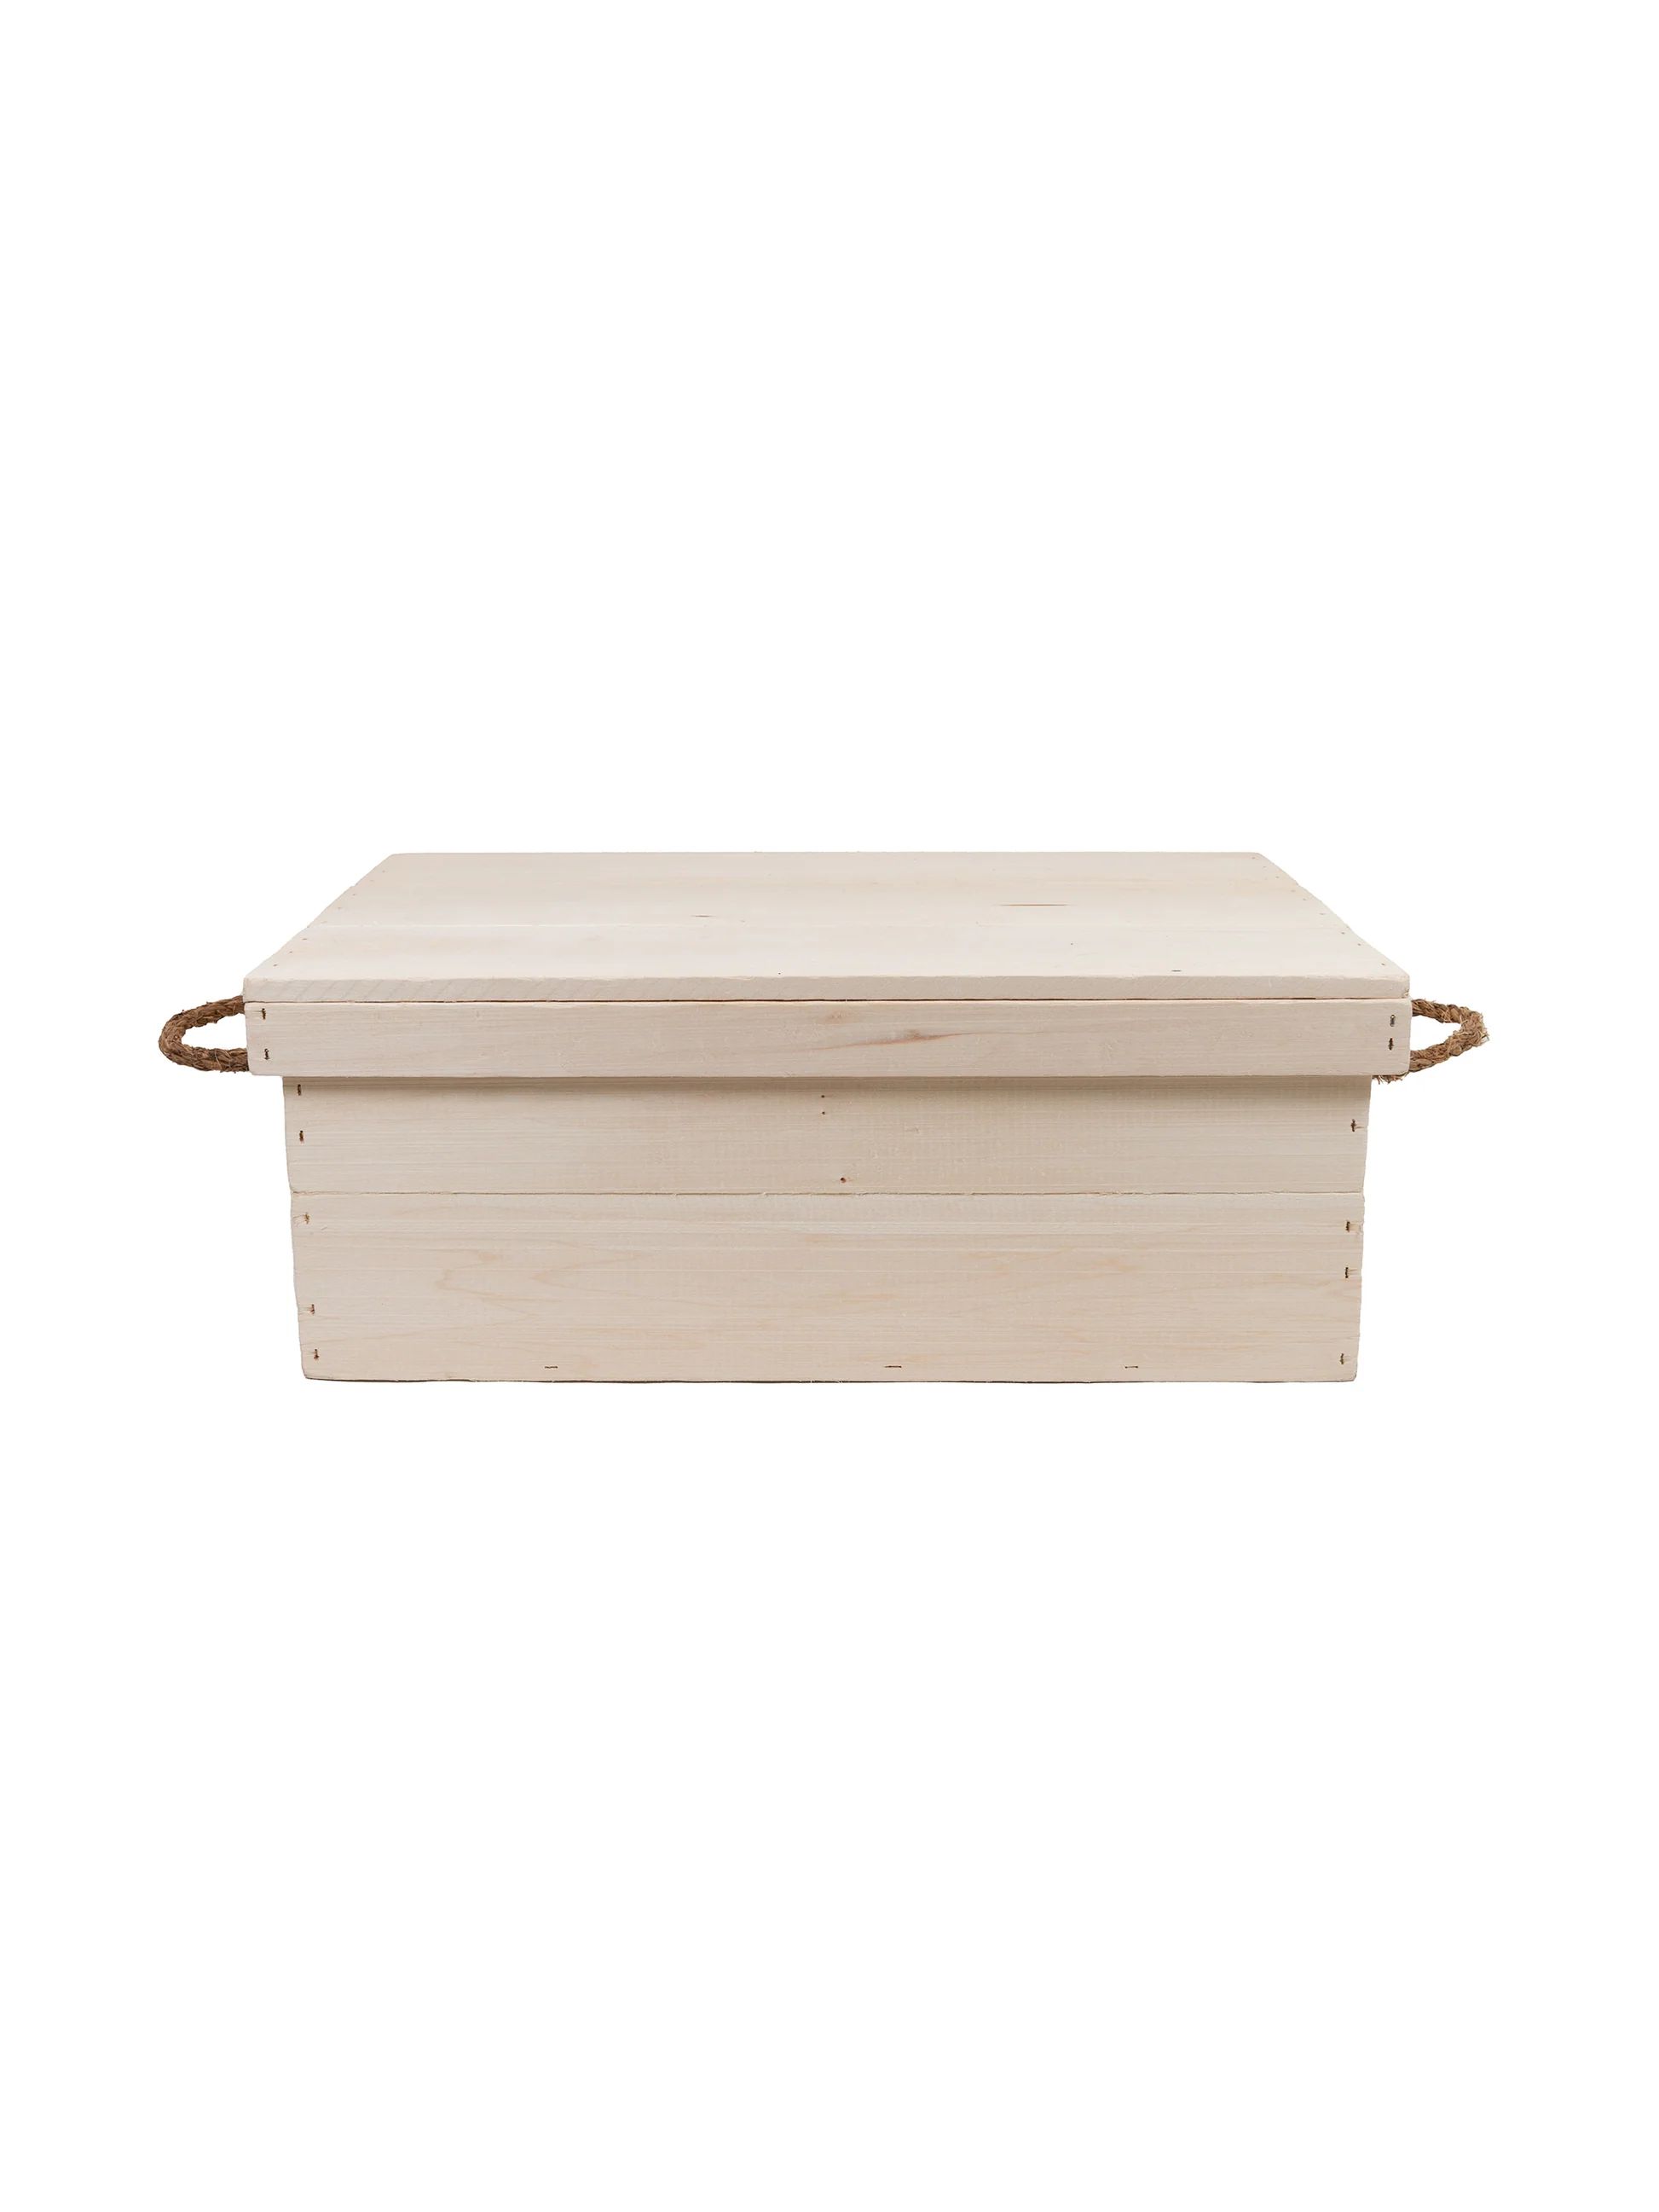 WT Wooden Keepsake Gift Crate with Rope Handles | Weston Table